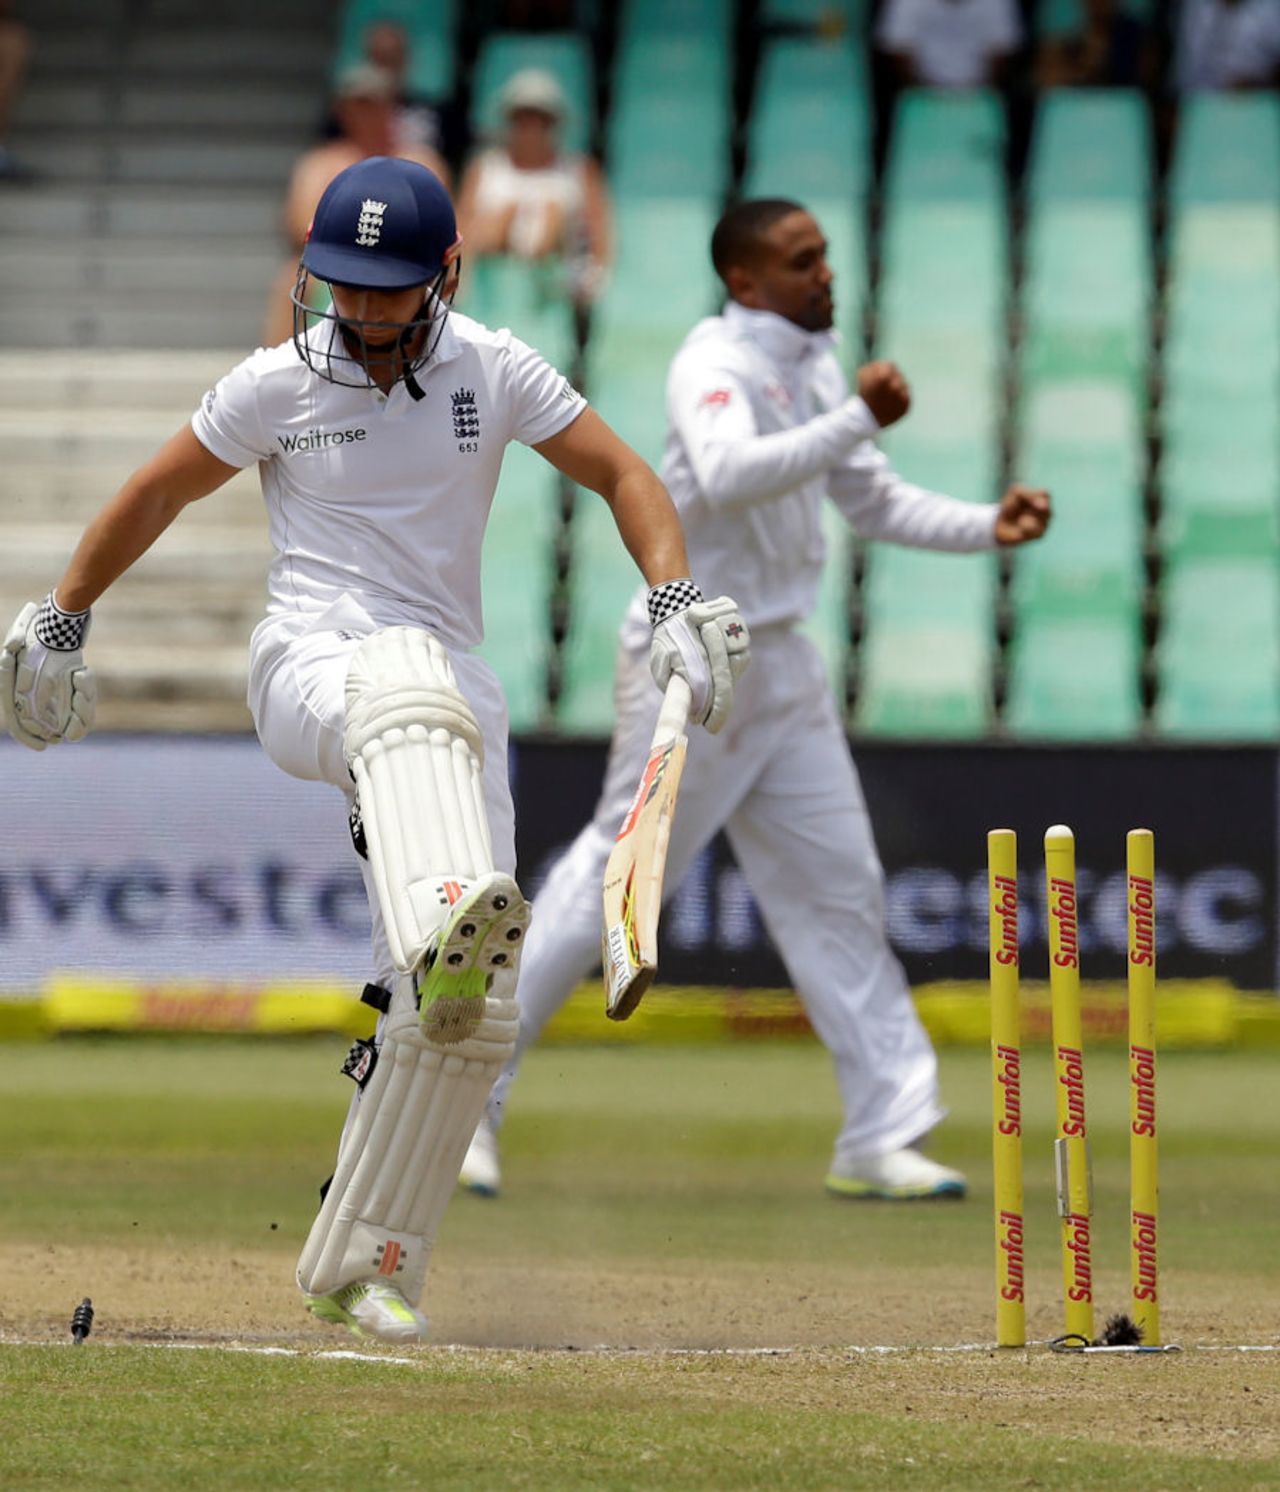 James Taylor kicks out in frustration after being bowled, South Africa v England, 1st Test, Durban, 4th day, December 29, 2015